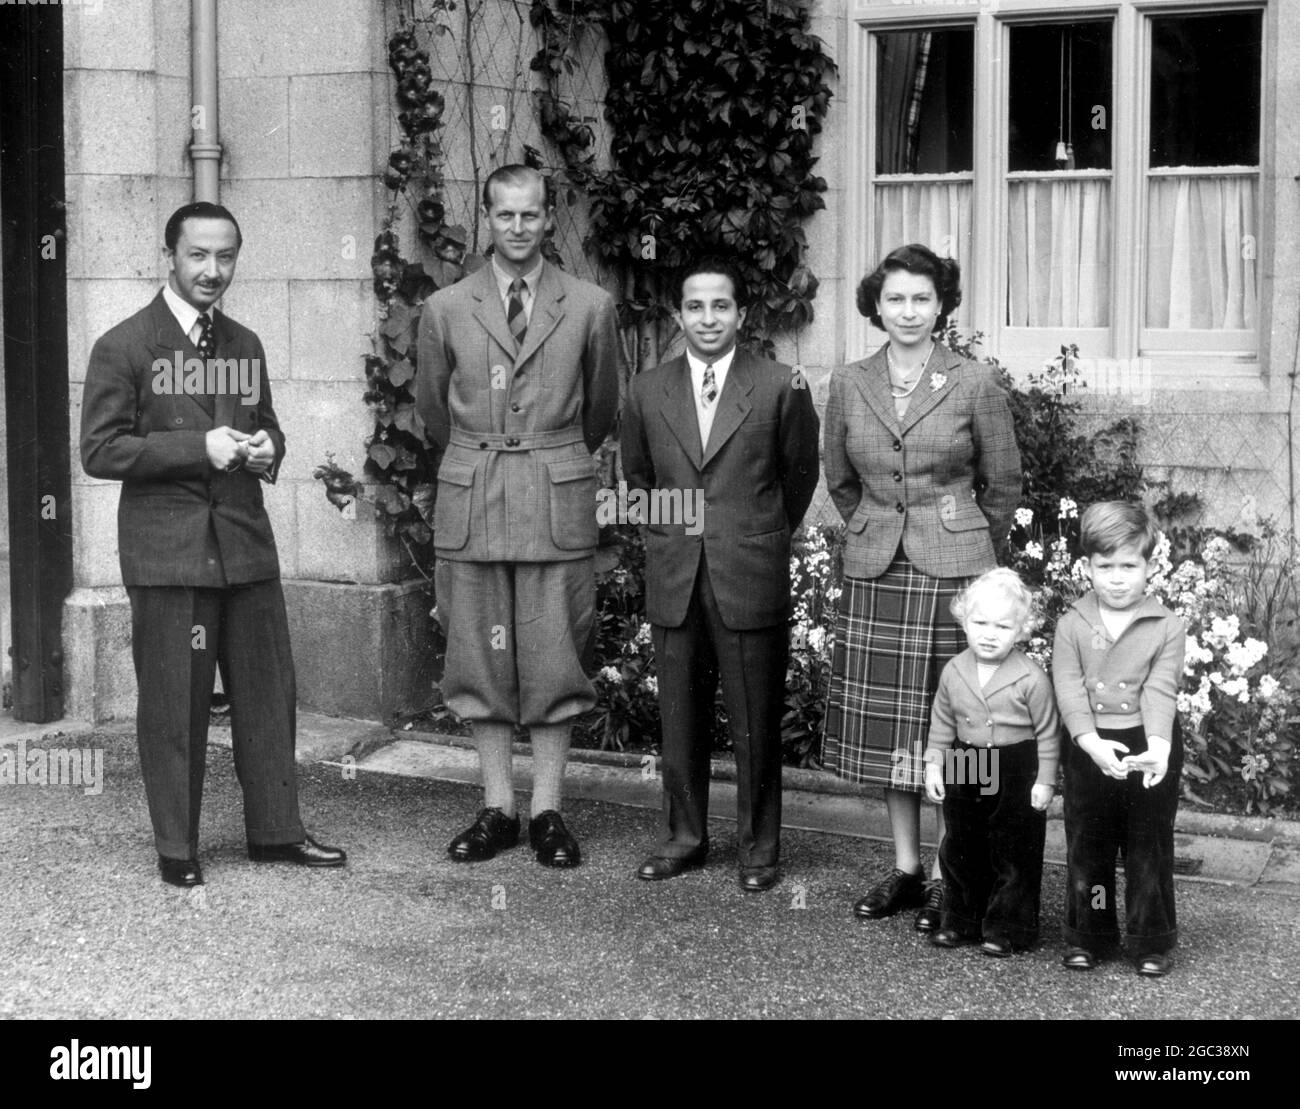 Balmoral, Scotland: The Duke of Edinburgh stands between Princess Ann and Prince Charles, as, together with Queen Elizabeth, they pose for their picture in the grounds of Balmoral Castle with 17-year old King Feisal of Iraq and his uncle, Emir Abdul Illah, the Prince Regent. The boy-King, an ex-Harrow schoolboy, is the guest of the Queen and Duke at Balmoral, their country home in Scotland. 26 September 1952 Stock Photo